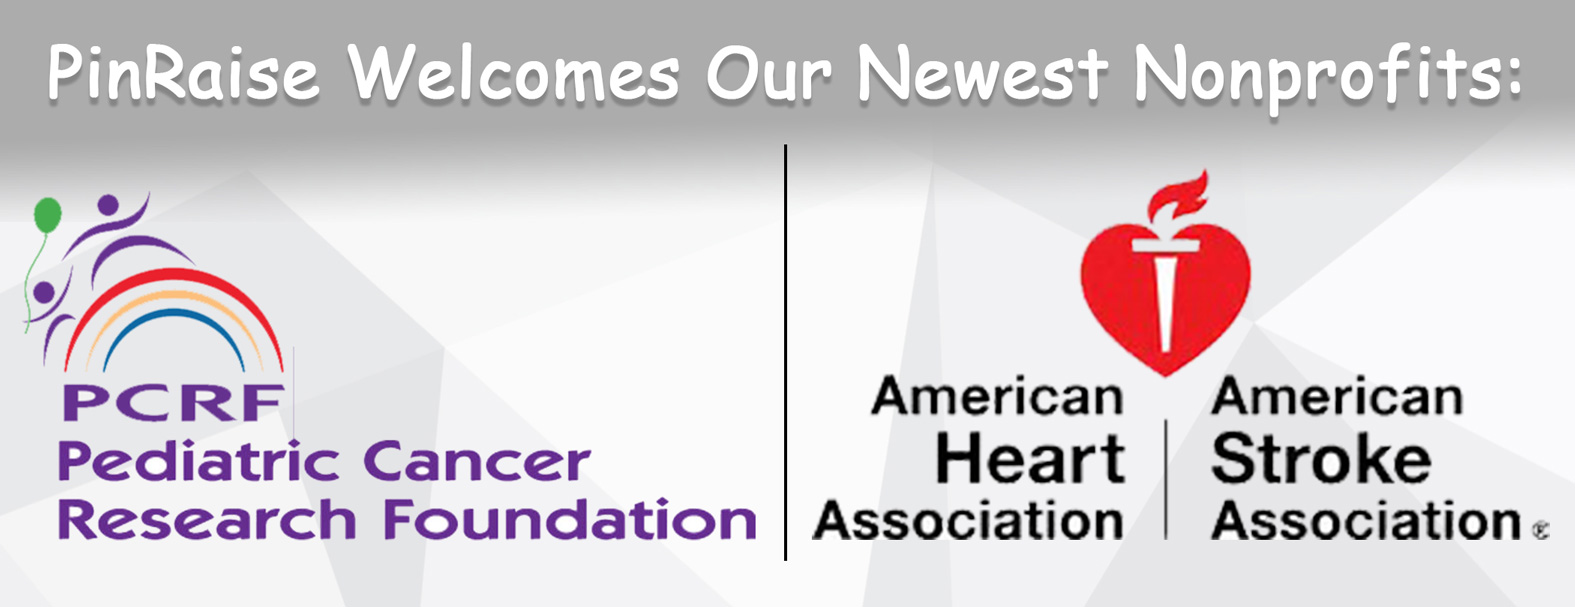 The American Heart Association's Orange County Chapter and the Pediatric Cancer Research Foundation Are Latest Nonprofits to Join PinRaise and The Agent with Heart Program